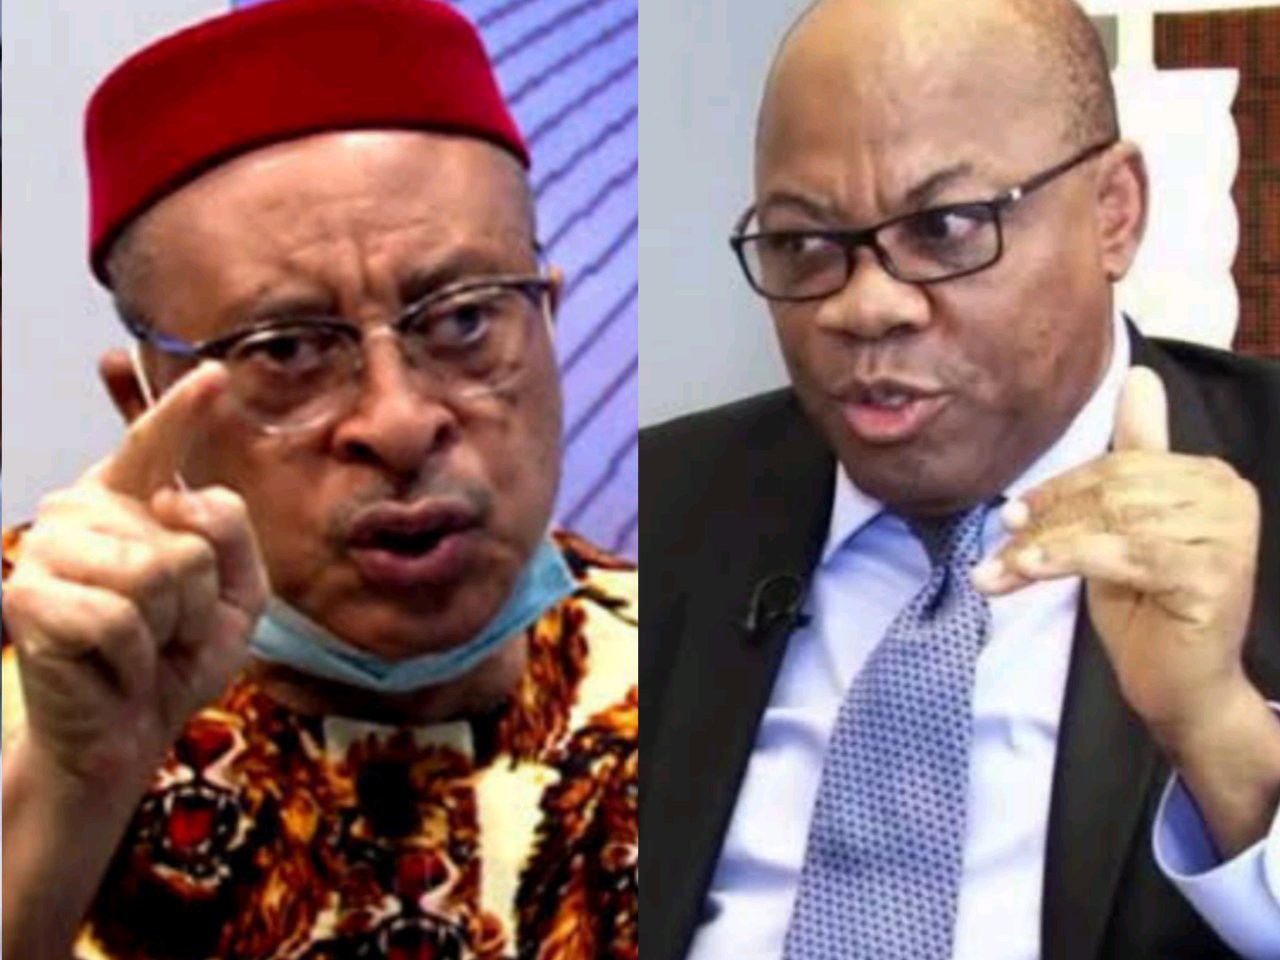 'One Former NBA Chairman, SAN Olisa Agbakoba said this Supreme Court is the worst in his 46 years of practice' - According to Prof Utomi